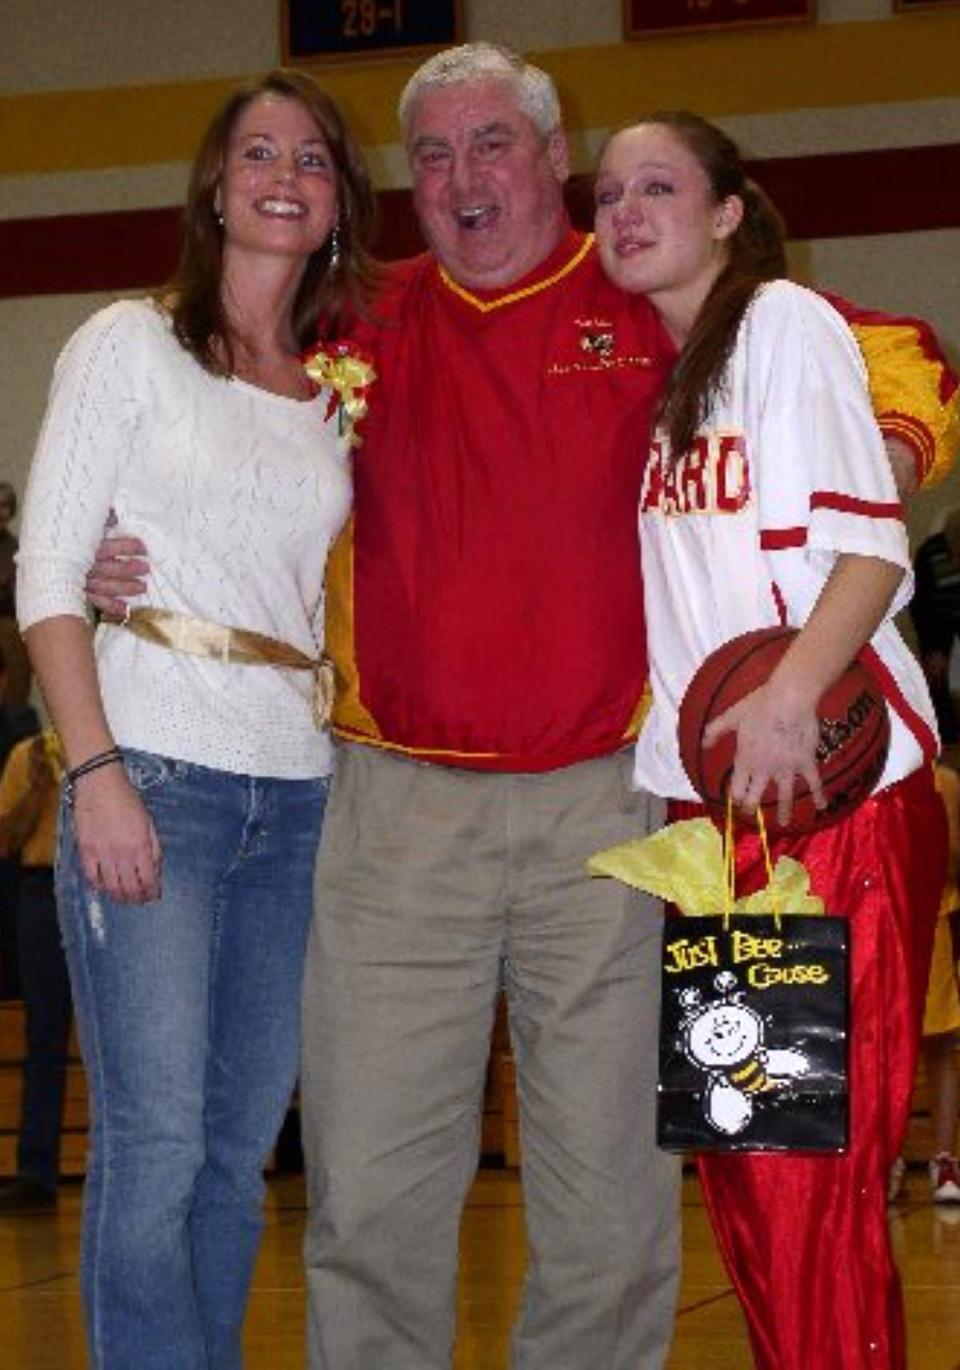 Ann Mimm Evans (left) and Carrie Nolan Stoczynski (right) pose with Girard girls basketball coach Larry Seneta in a 2005 photo. The trio were on hand for a ceremony that included the retirement of Evans' No. 40 jersey and Stoczynski's No. 11. Stoczynski (1,813 points) and Evans (1,713) remain first and second on the team's career scoring list. Evans will officially join Seneta (2009) and Stoczynski (2022) in the Metro Erie Sports Hall of Fame when she's enshrined on June 26.